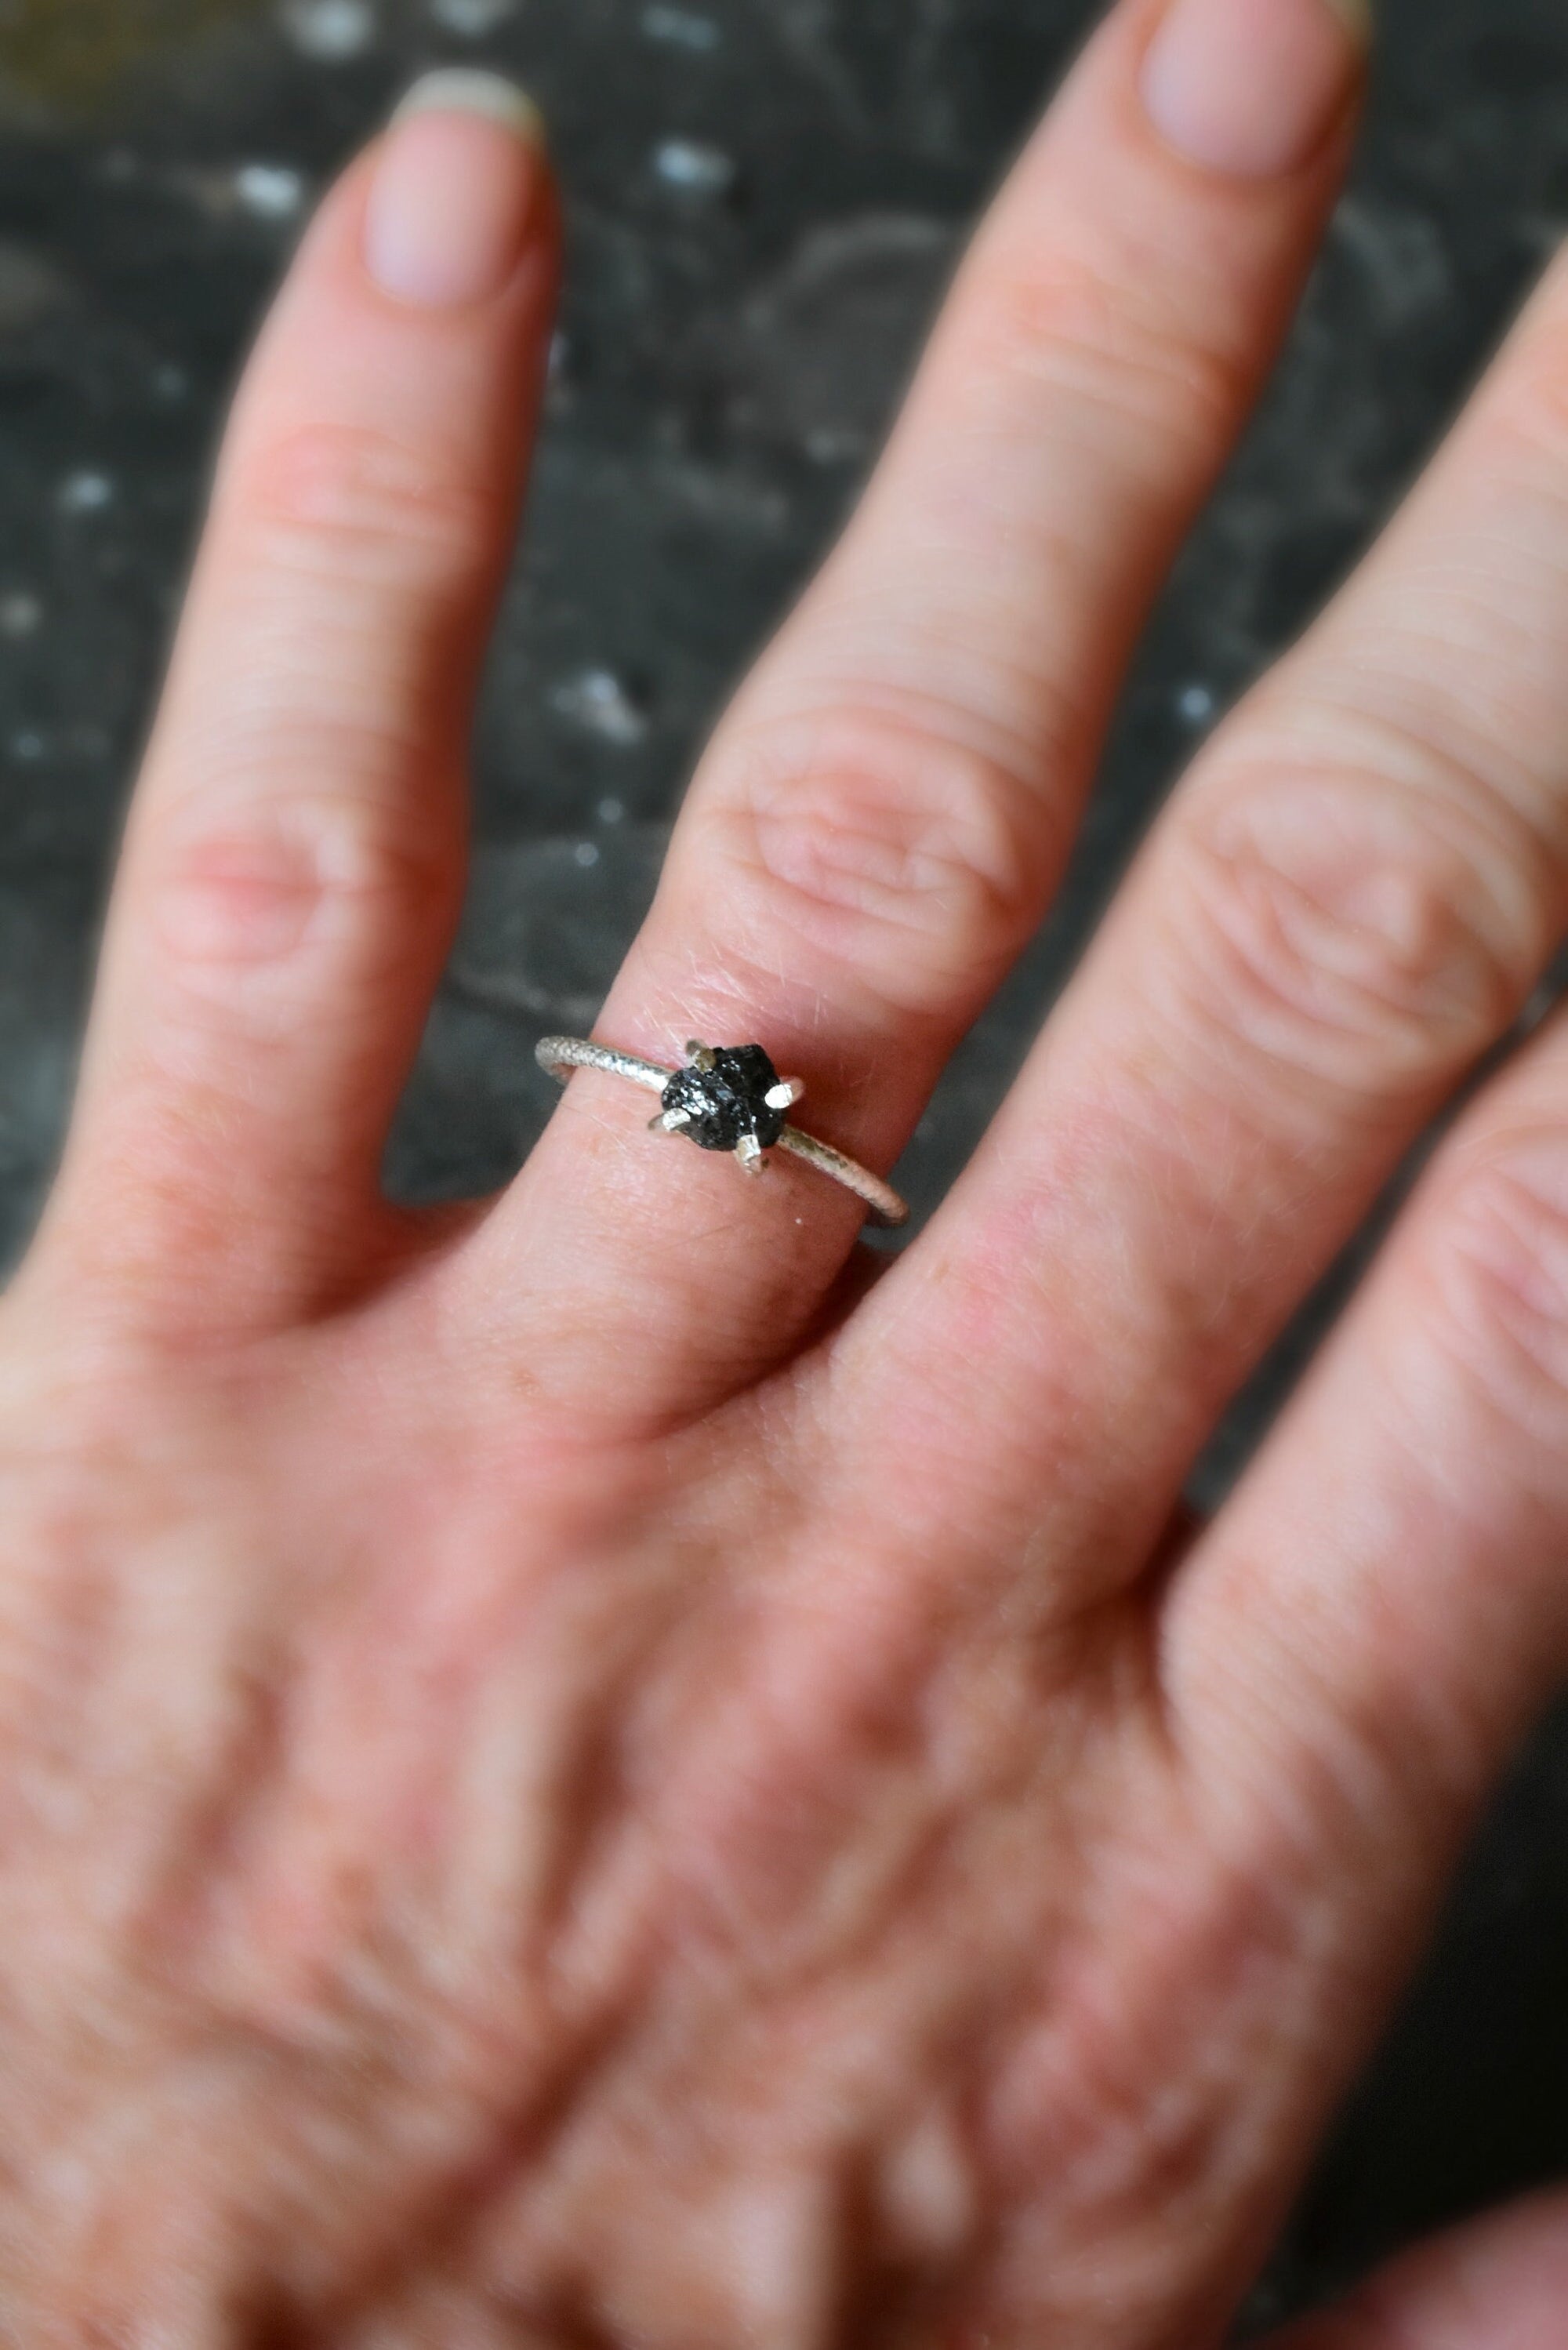 Black Diamond Ring, Large Black Diamond Engagement Ring, 1 Carat Wedding Ring in Unique Silver Band, Luxury Jewelry for Wife, Proposal Ring